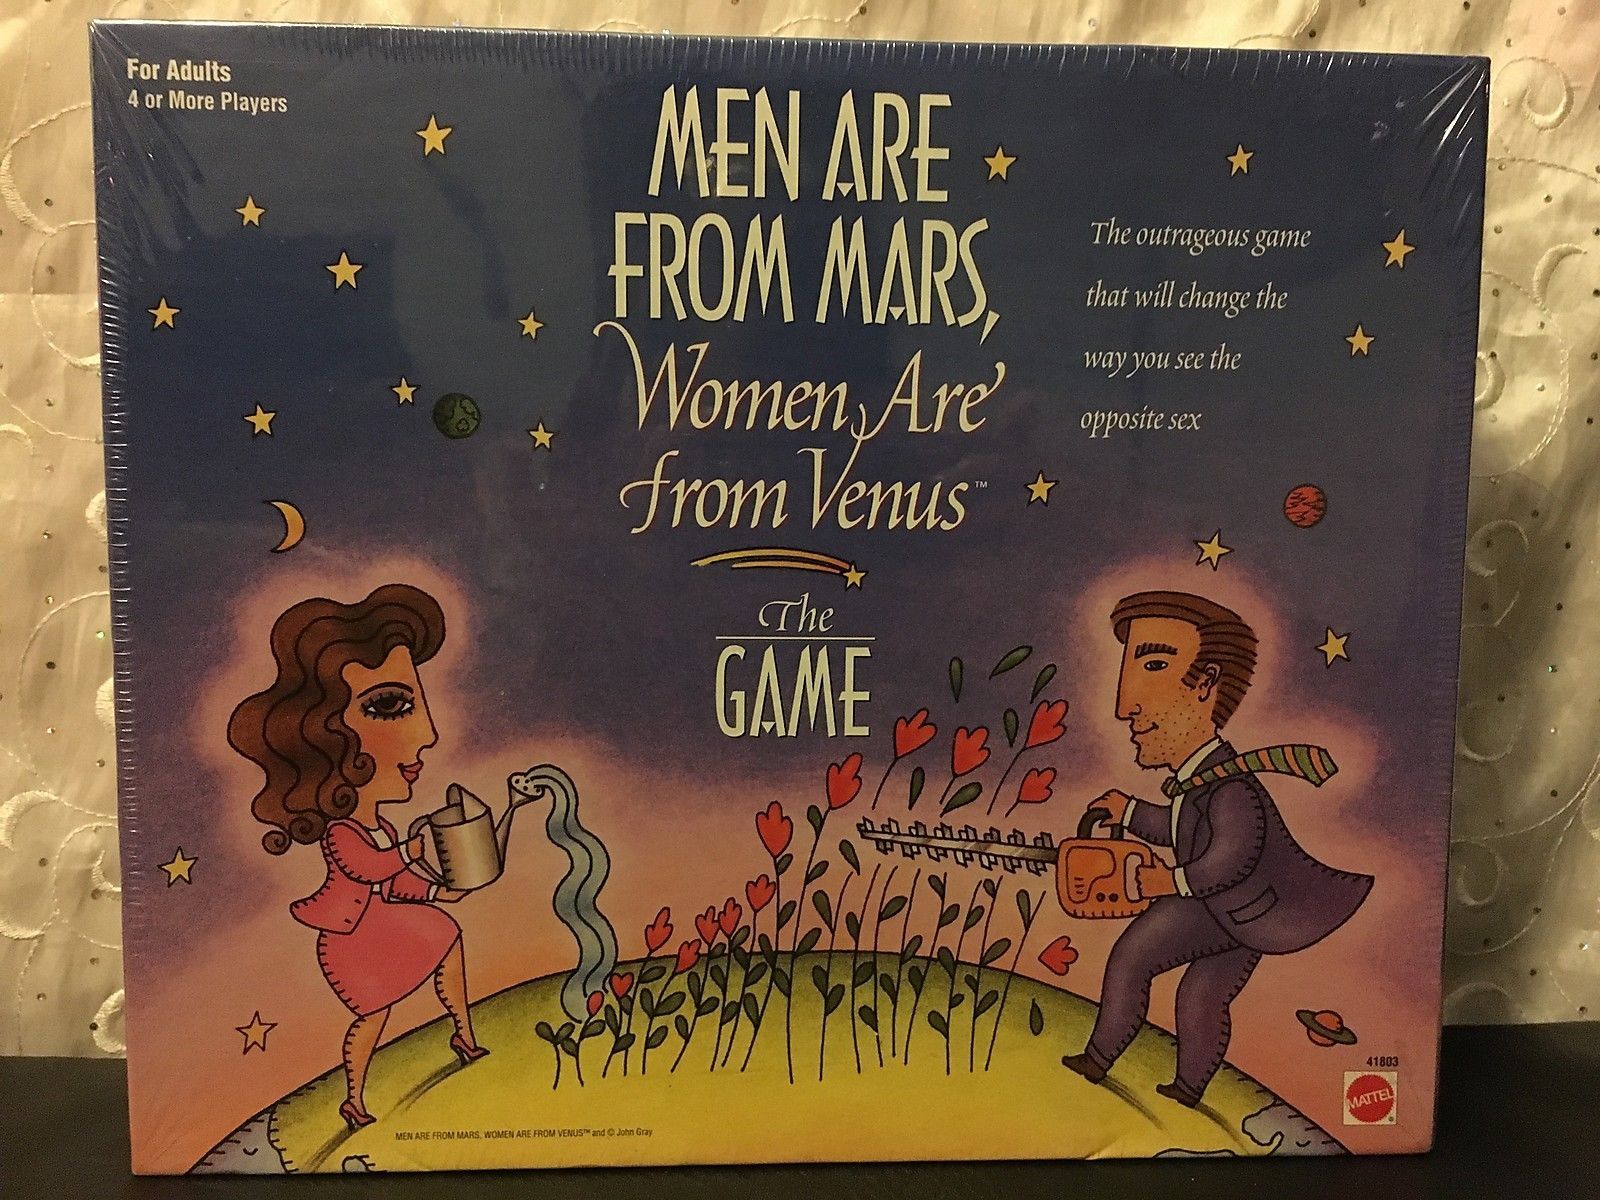 men are from mars and women are from venus book